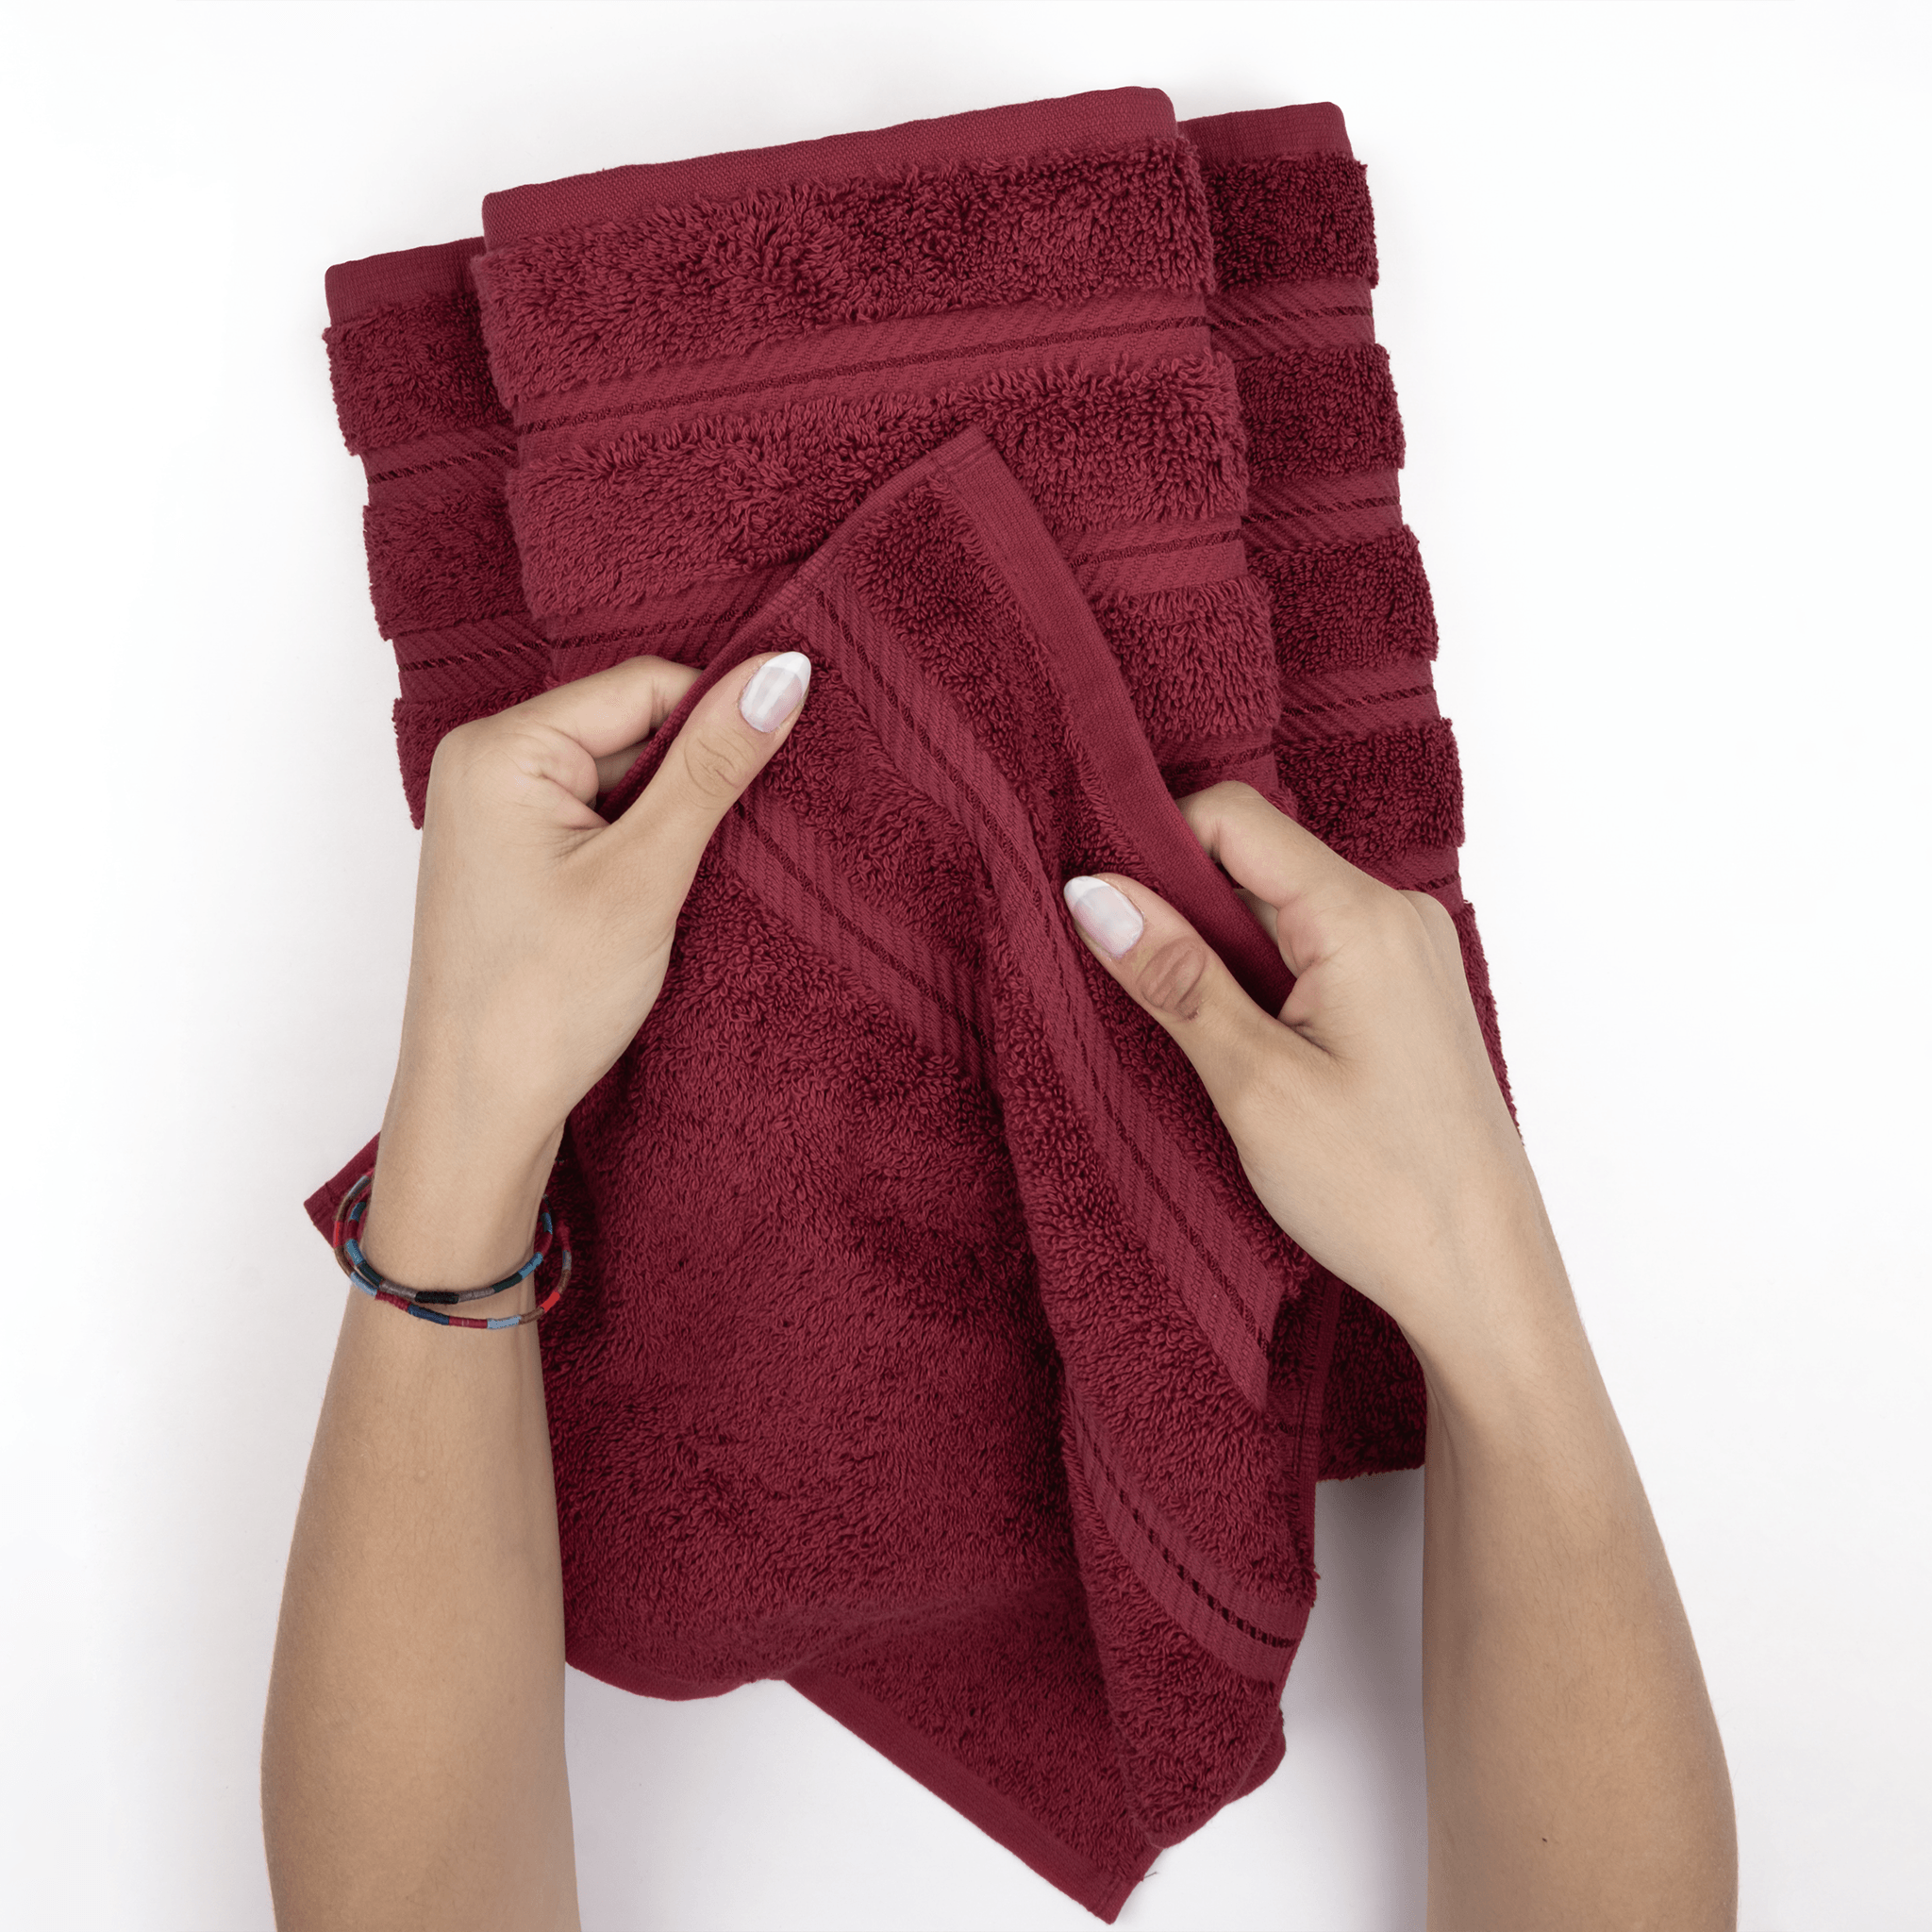 Linen Cotton Blend Turkish Towel - Natural and Red